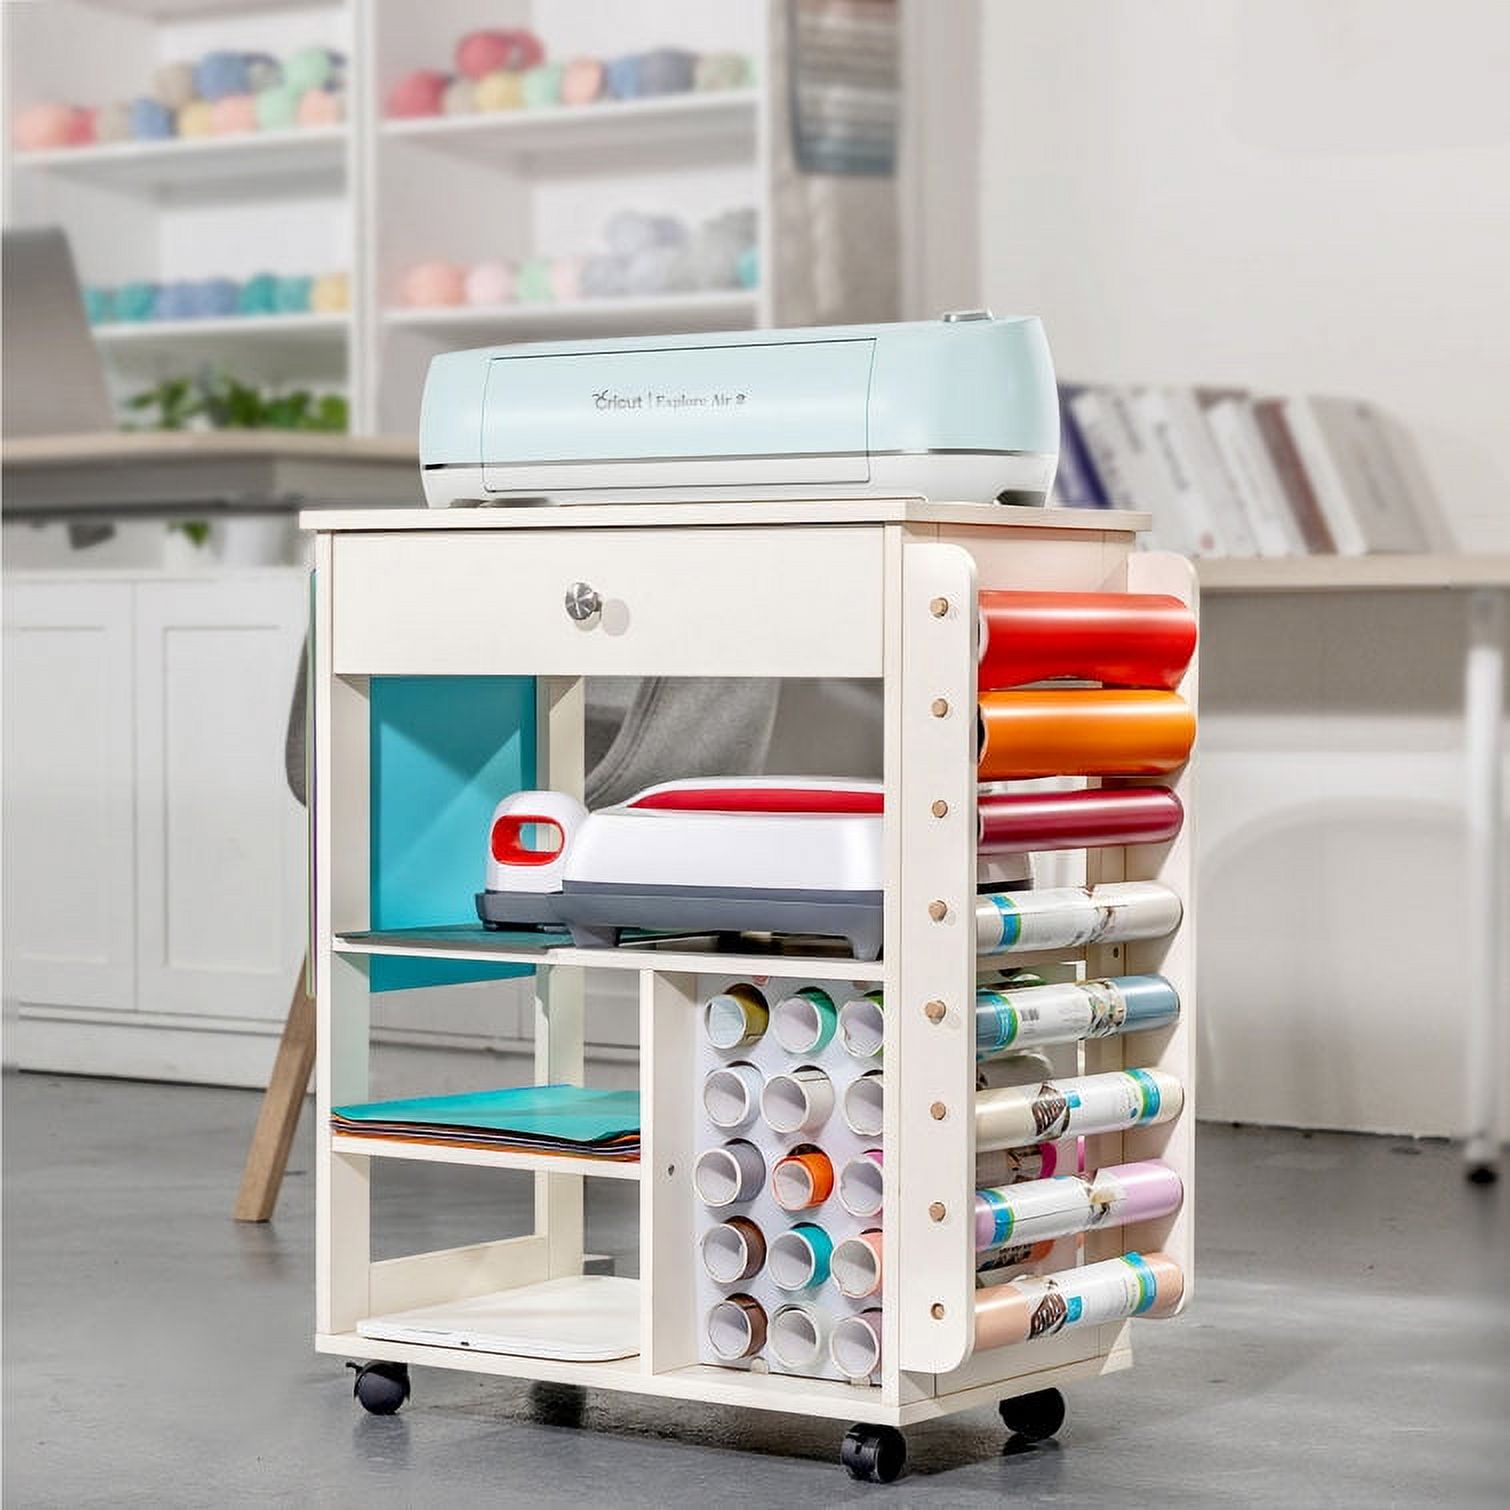 Organization and Storage Cart Compatible with Cricut Machine, Rolling Craft Storage Organizer with Vinyl Roll Holder, Crafting Cabinet Table Workstation for Craft Room Home - Compact Removable - image 2 of 7